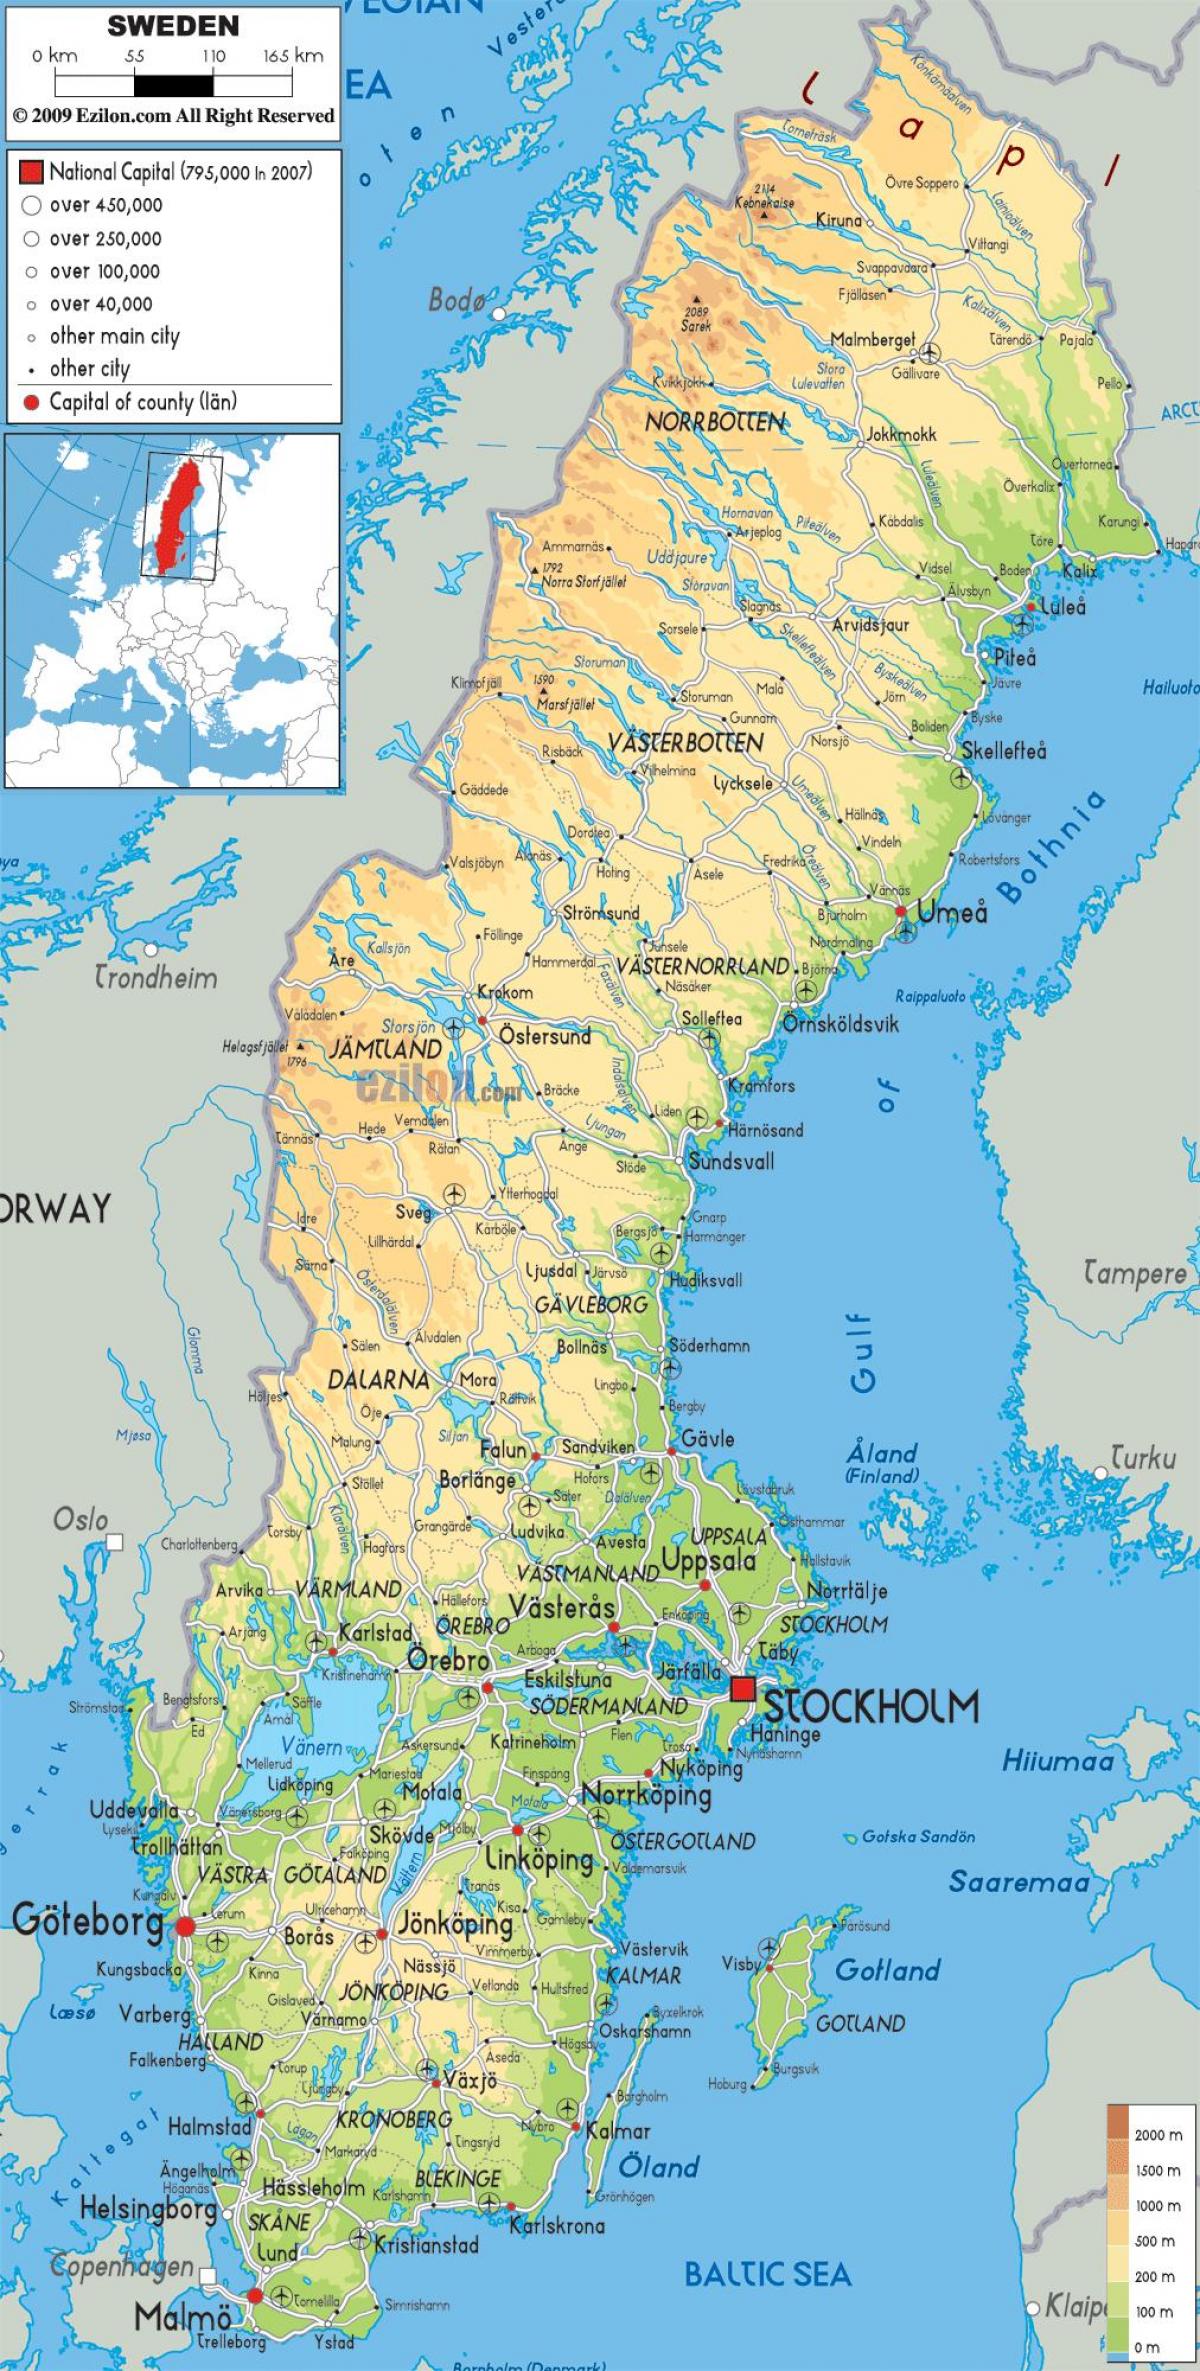 geographical map of Sweden